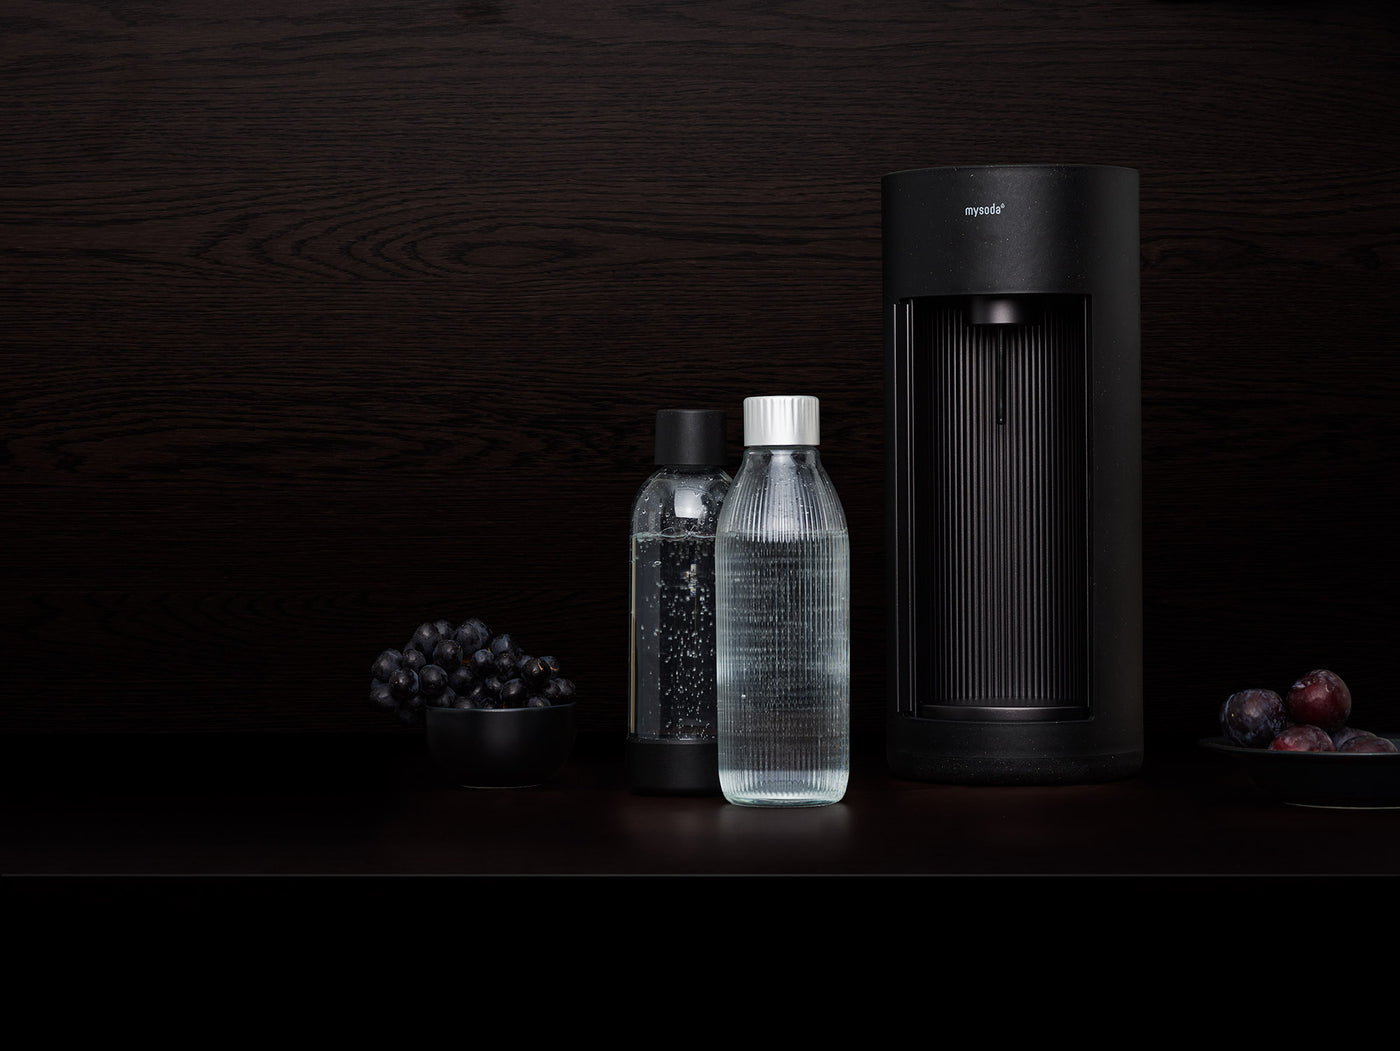 A black Glassy sparkling water maker and glass bottle in front of black background